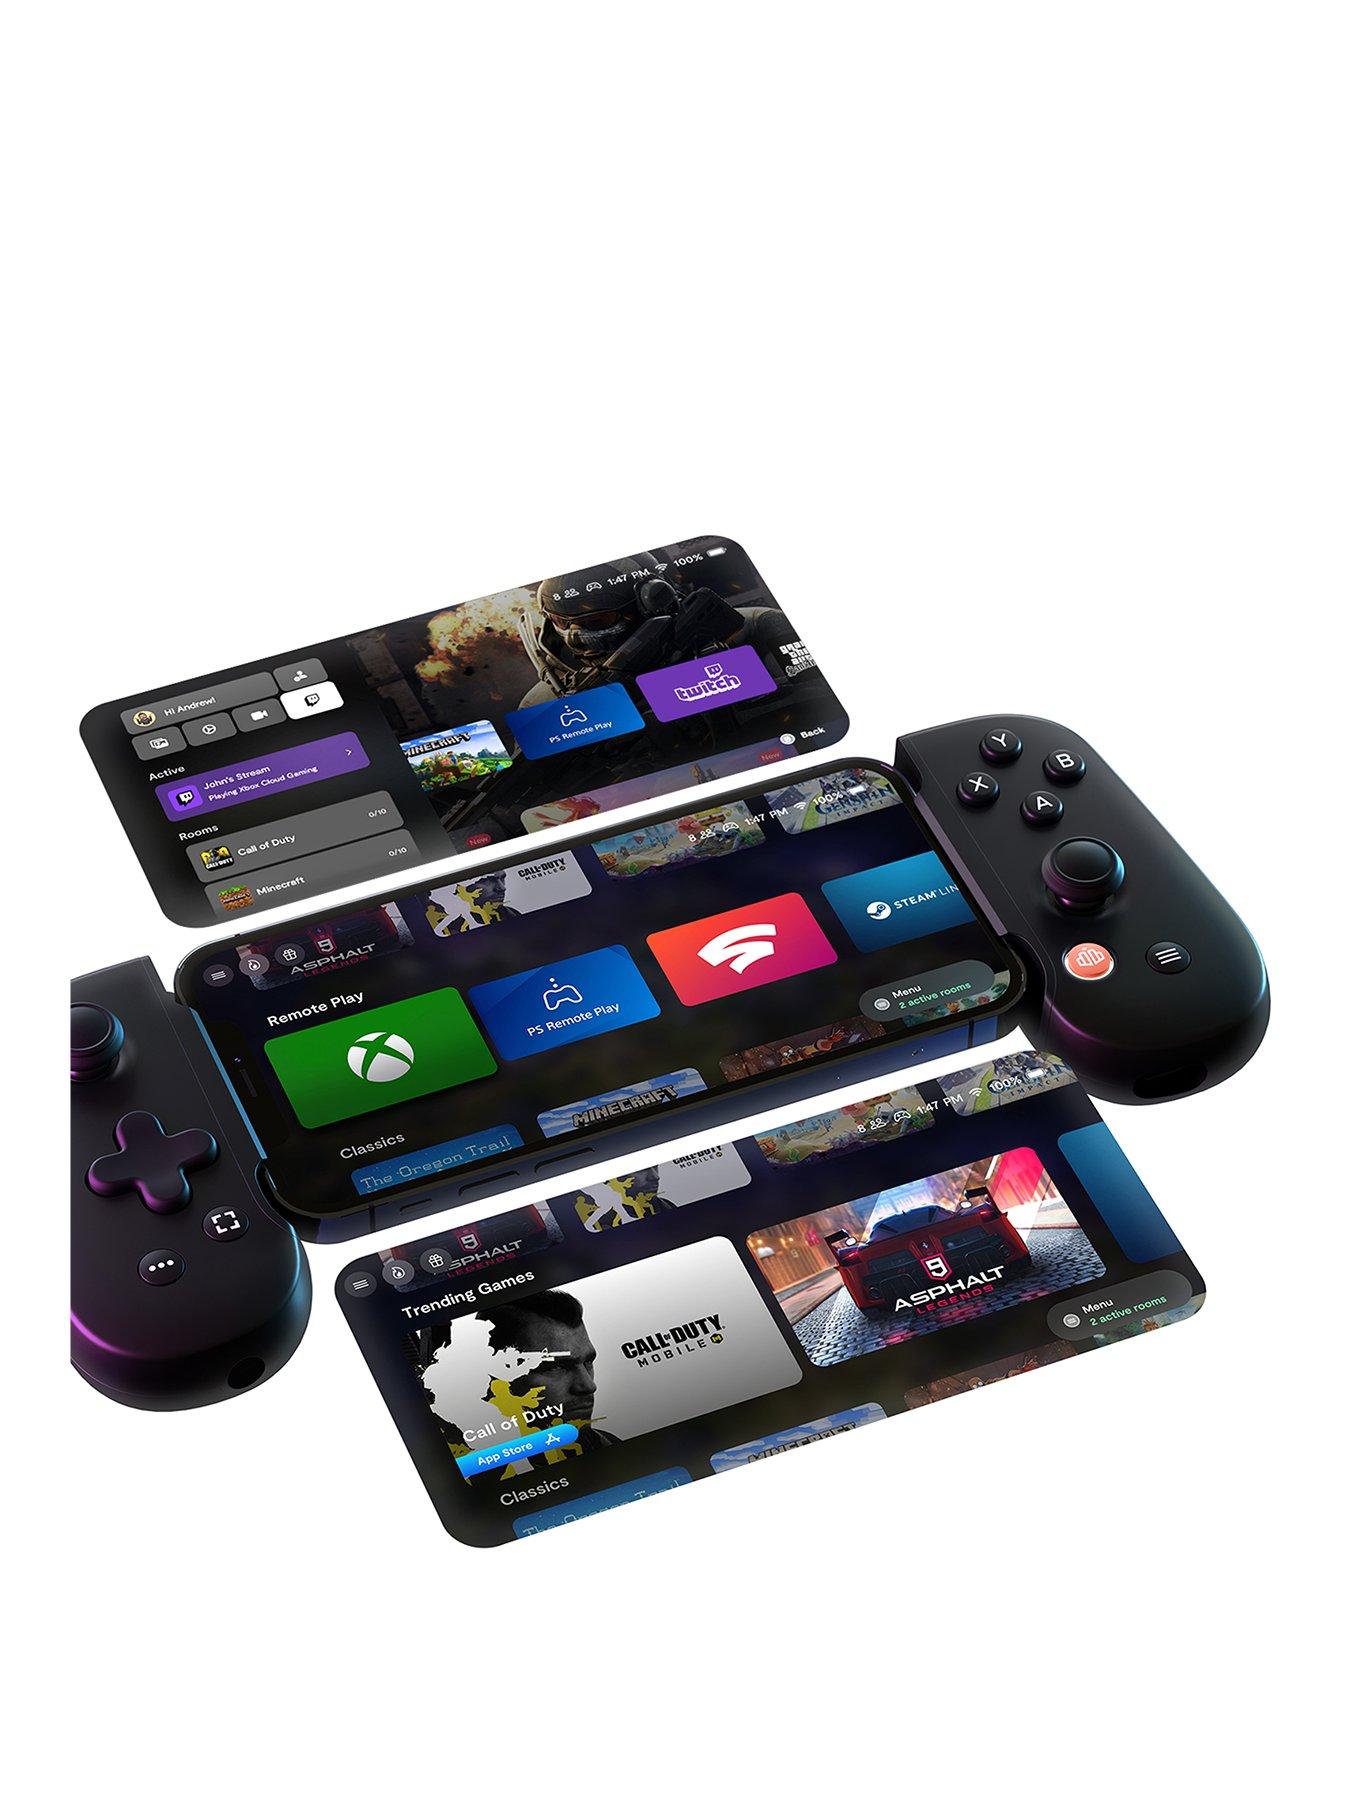 Backbone One mobile controller review: The best game controller